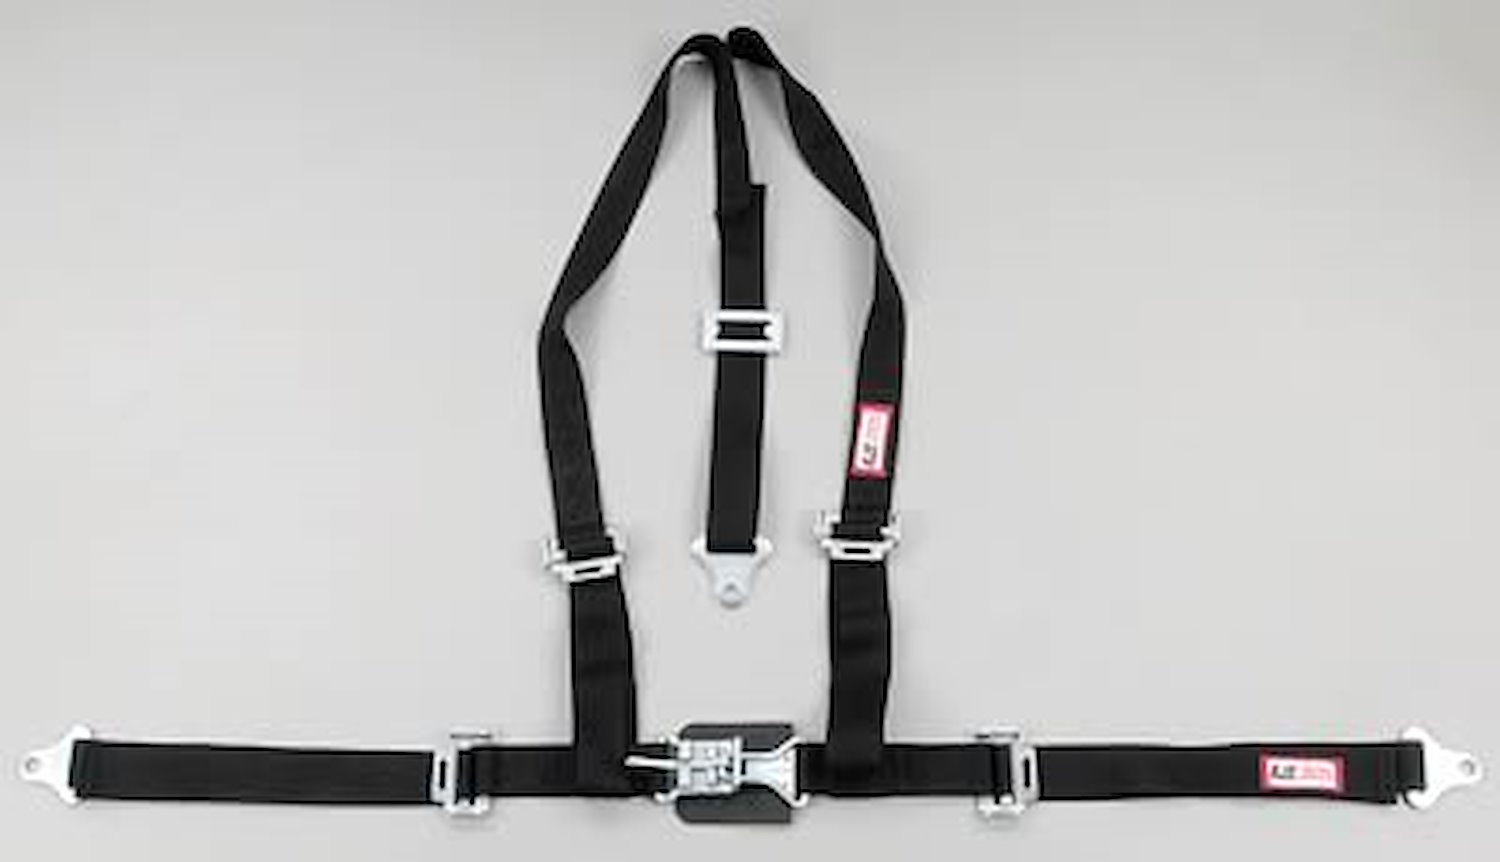 NON-SFI L&L HARNESS 2 PULL UP Lap Belt SEWN IN 2 S.H. Individual ROLL BAR Mount w/STERNUM STRAP ALL WRAP ENDS GRAY